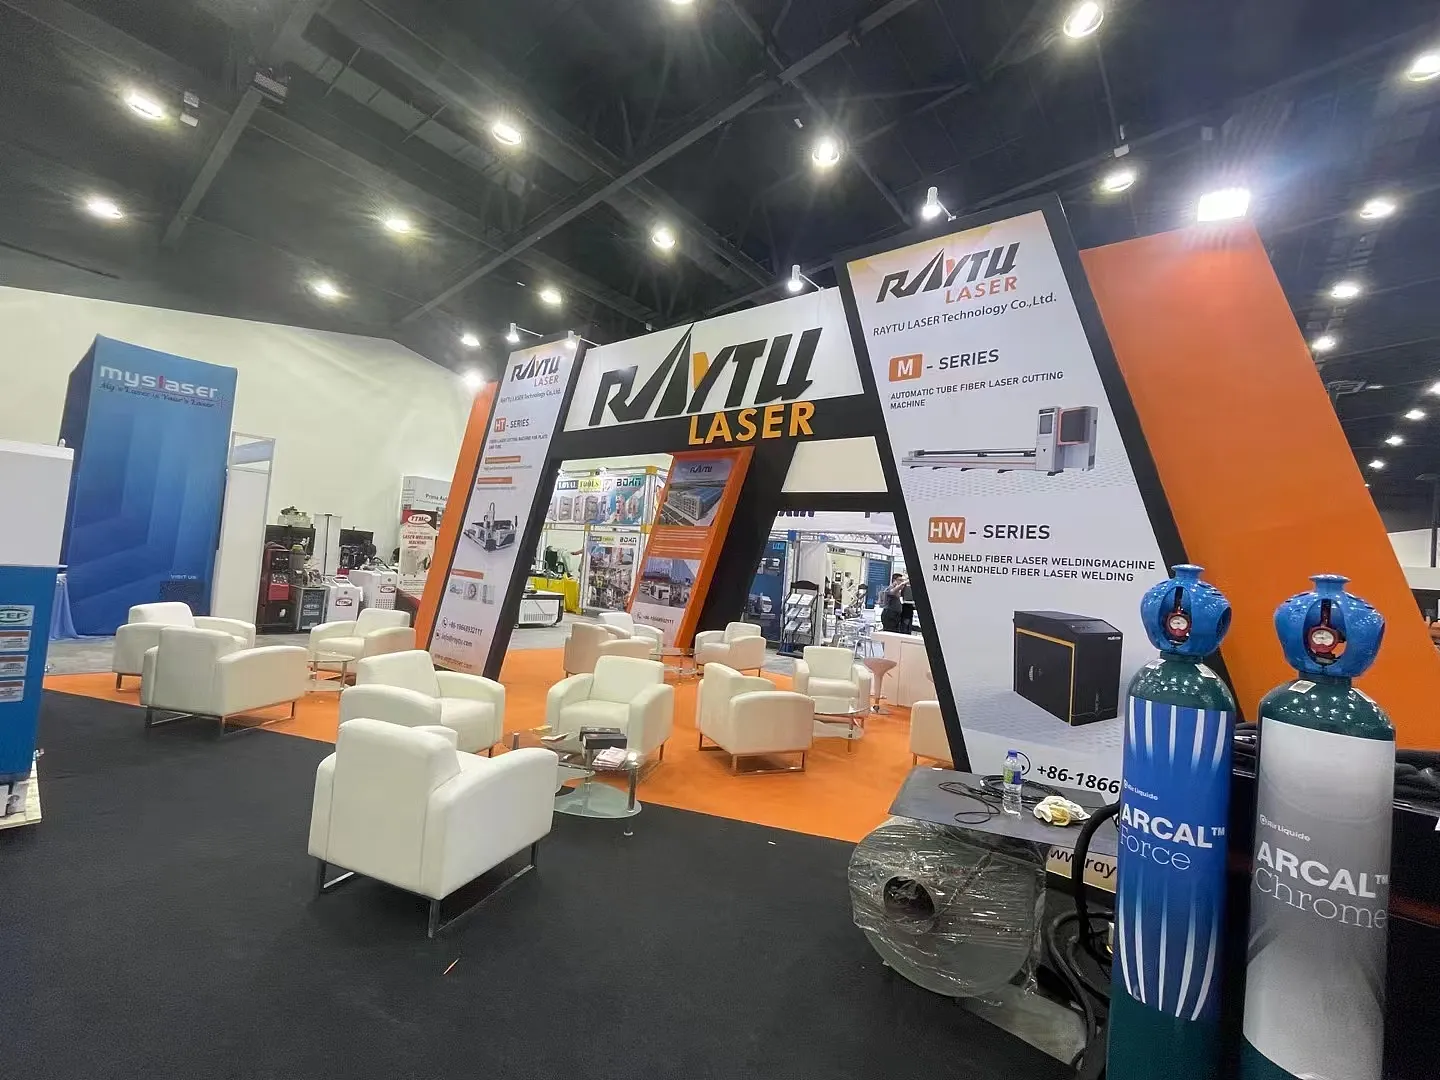 Raytu laser is invited to participatethe #MTE exhibition in Malaysia!